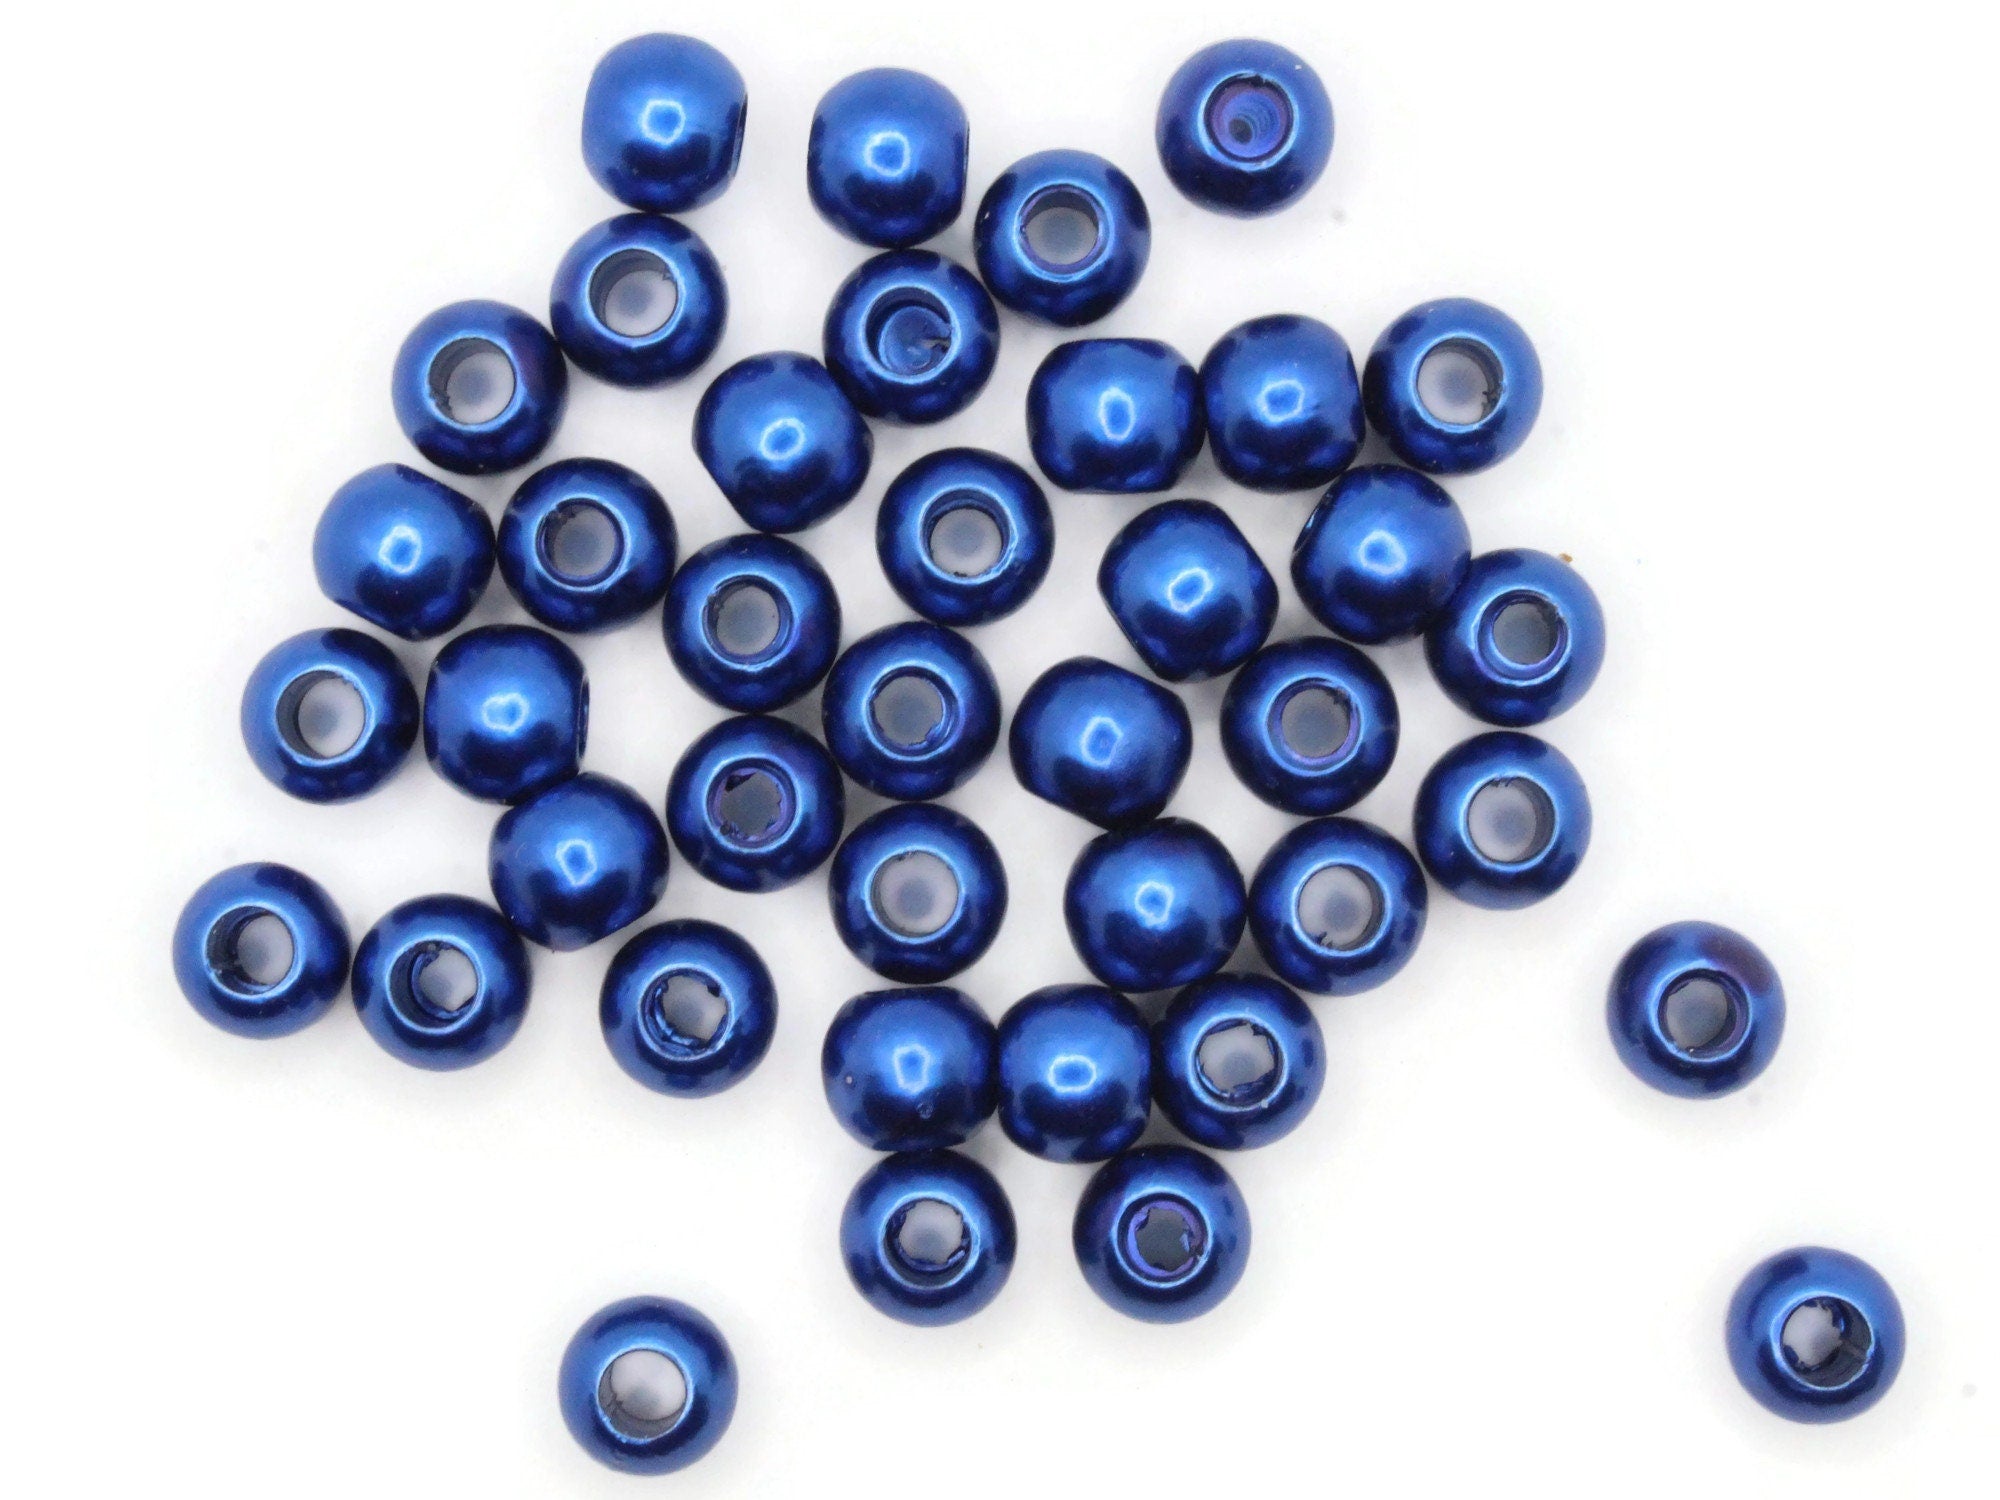 Blue Pearl Beads for Jewelry Making, 1750pcs Royal Blue Pearl Craft Bead  with Hole 4mm 6mm 8mm 10mm 12mm Loose Spacer Bead for Necklace Bracelet